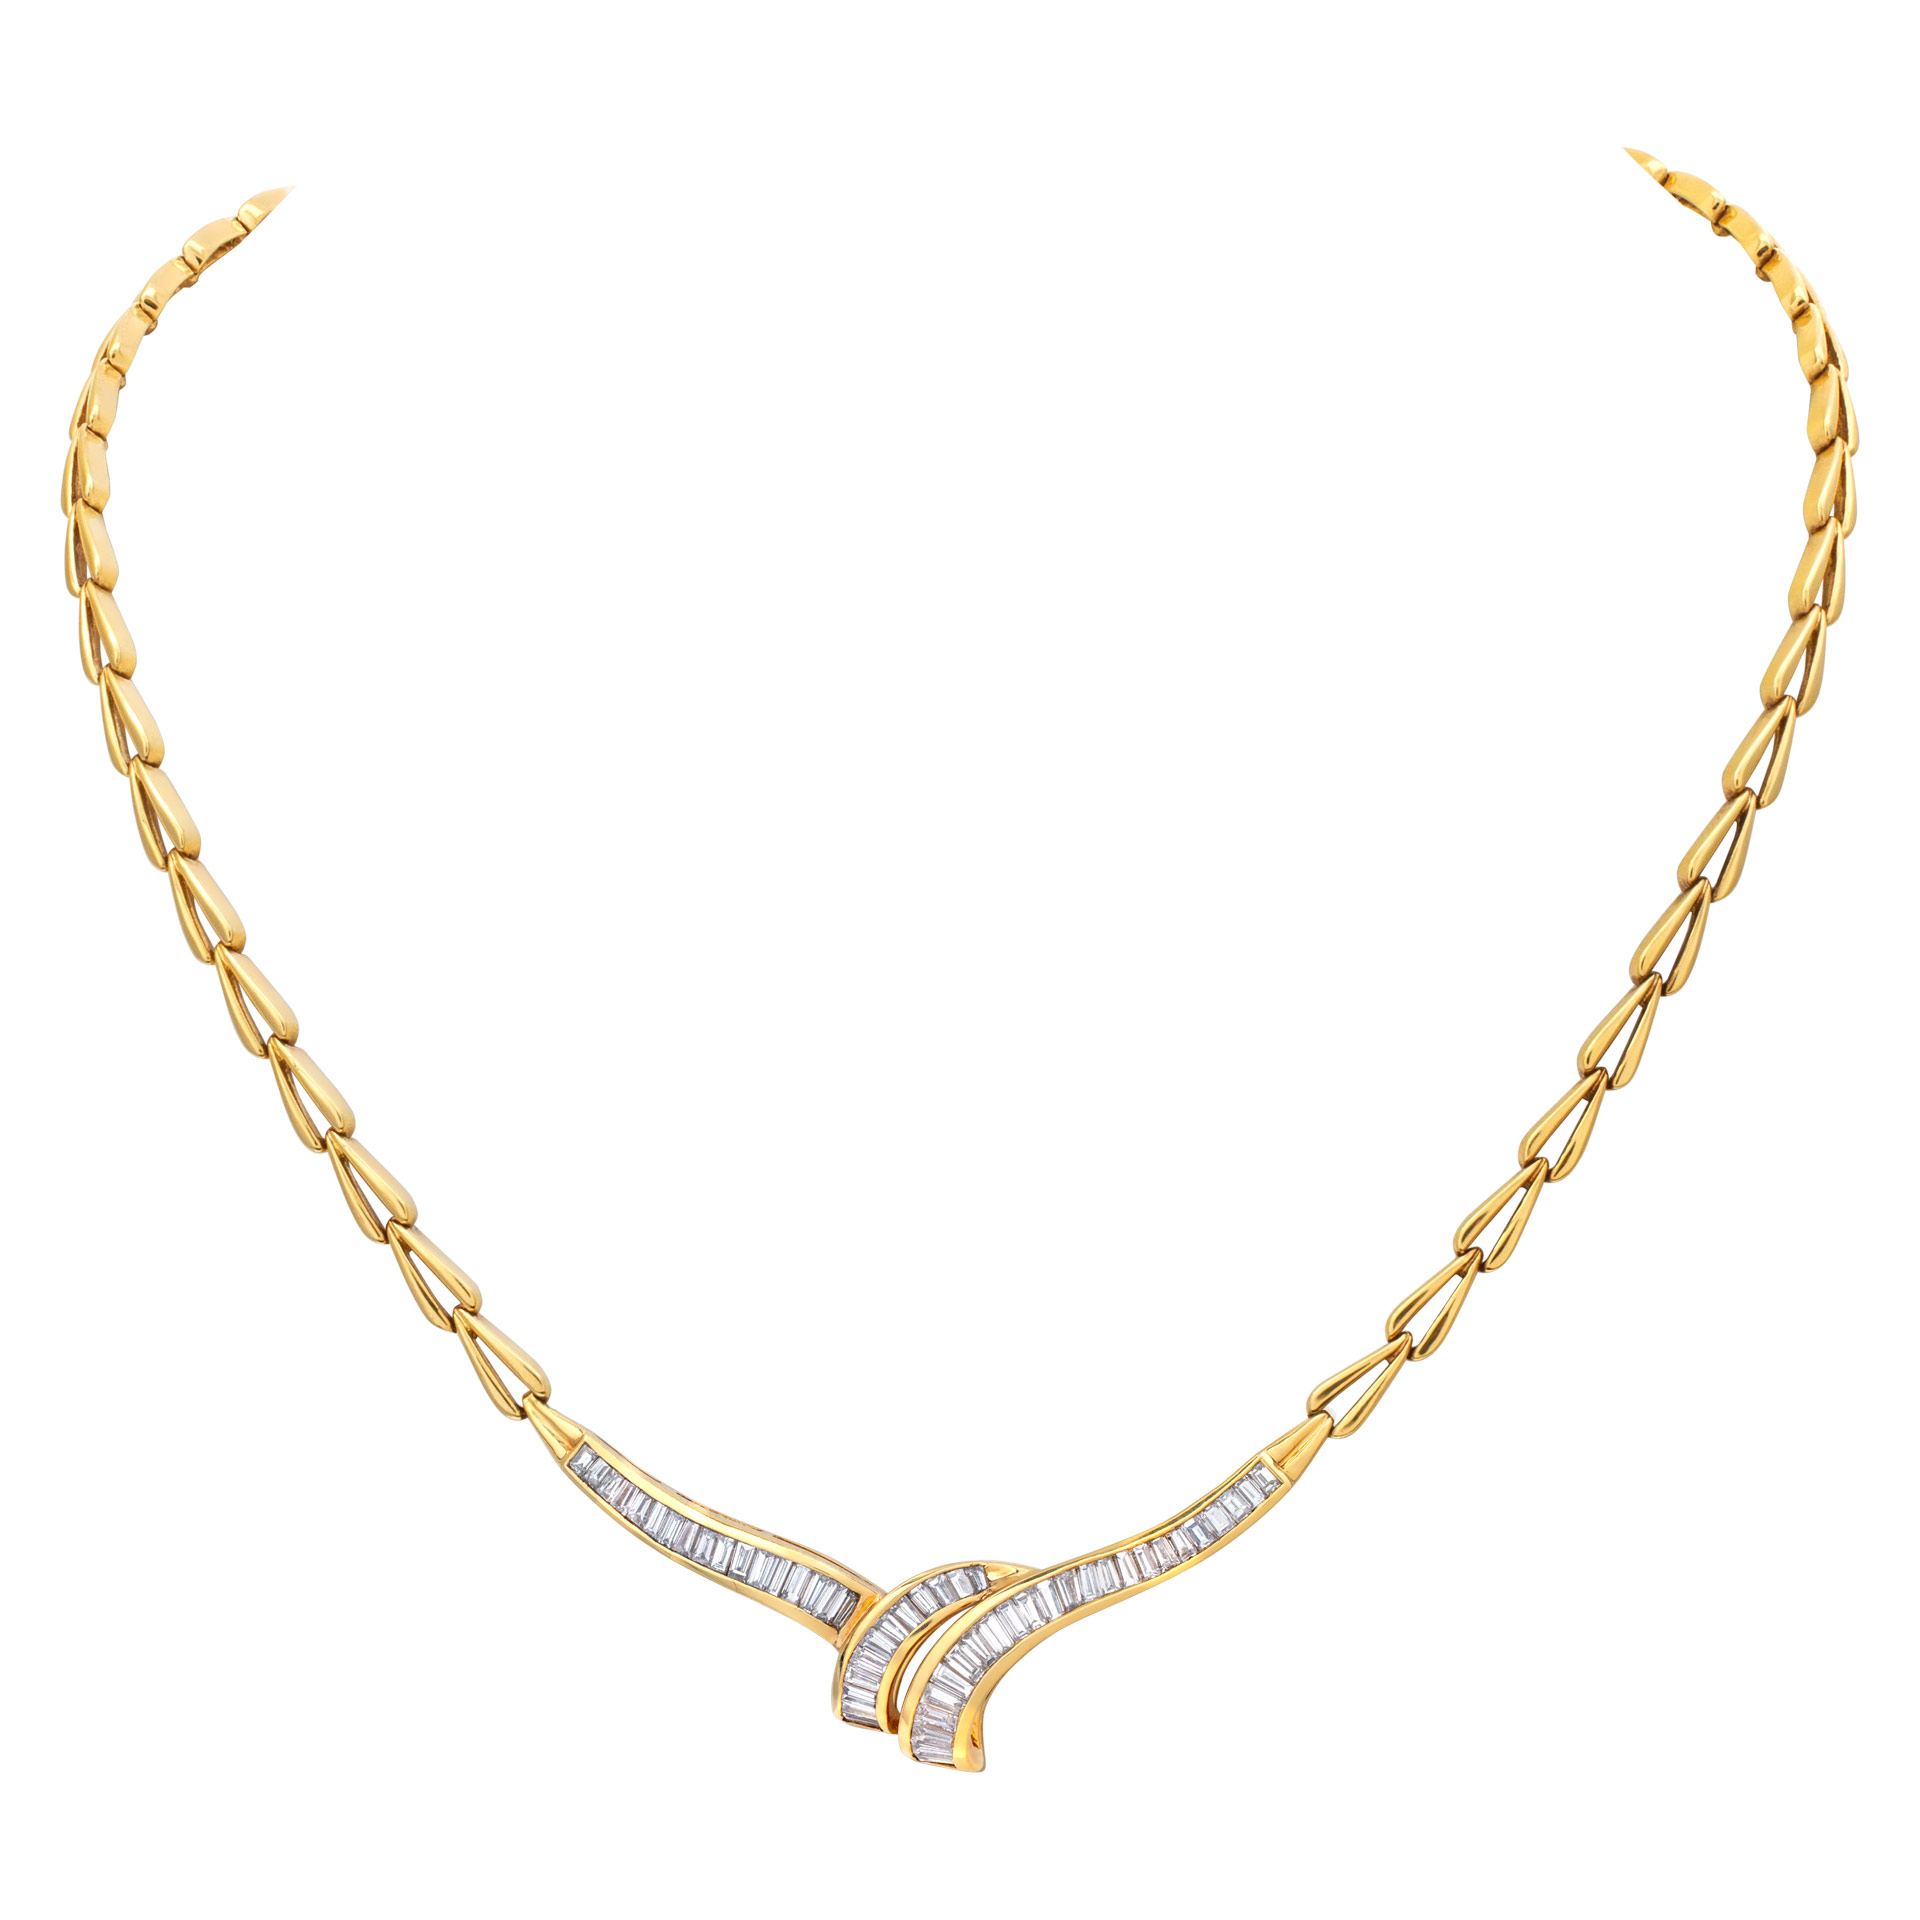 Baguette diamond necklace in 18k yellow gold with approximately 2.5 carats in diamonds image 1